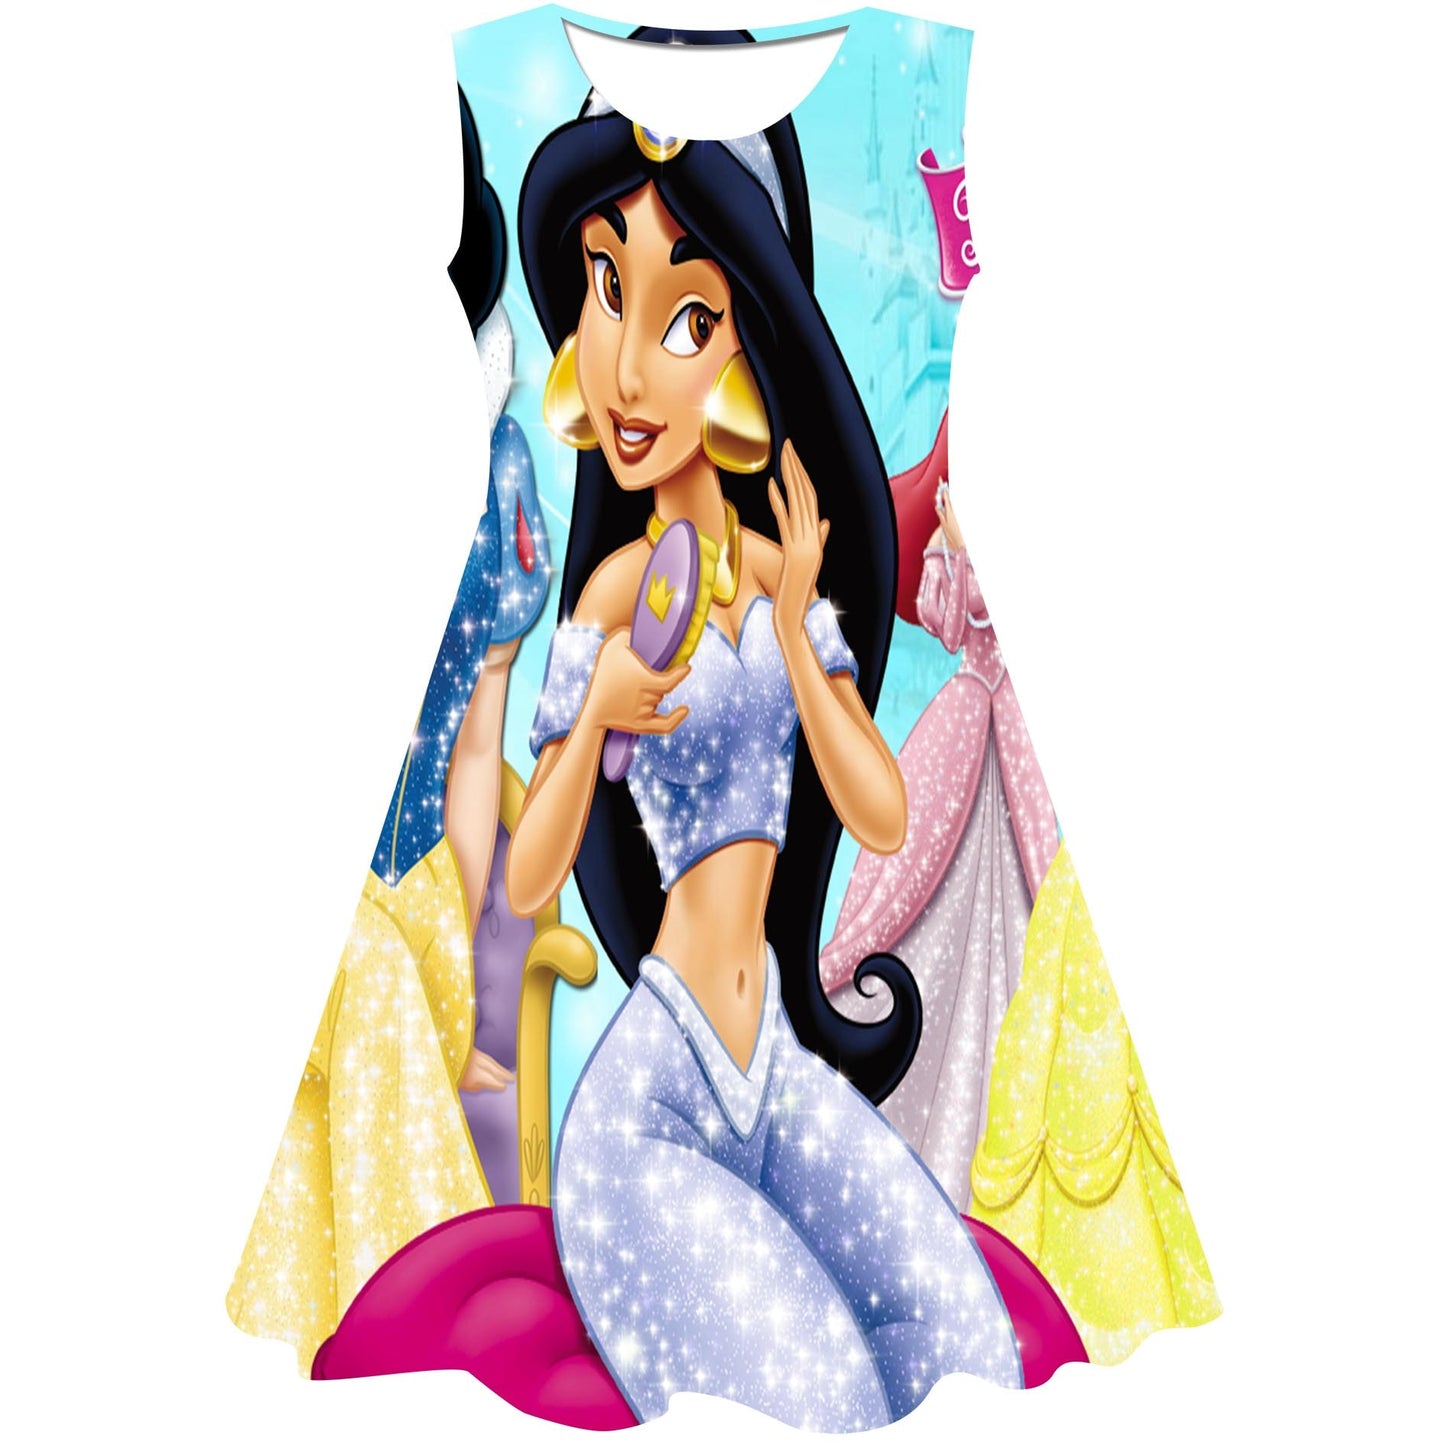 Princess Party Dress for Girls 6M-10Y